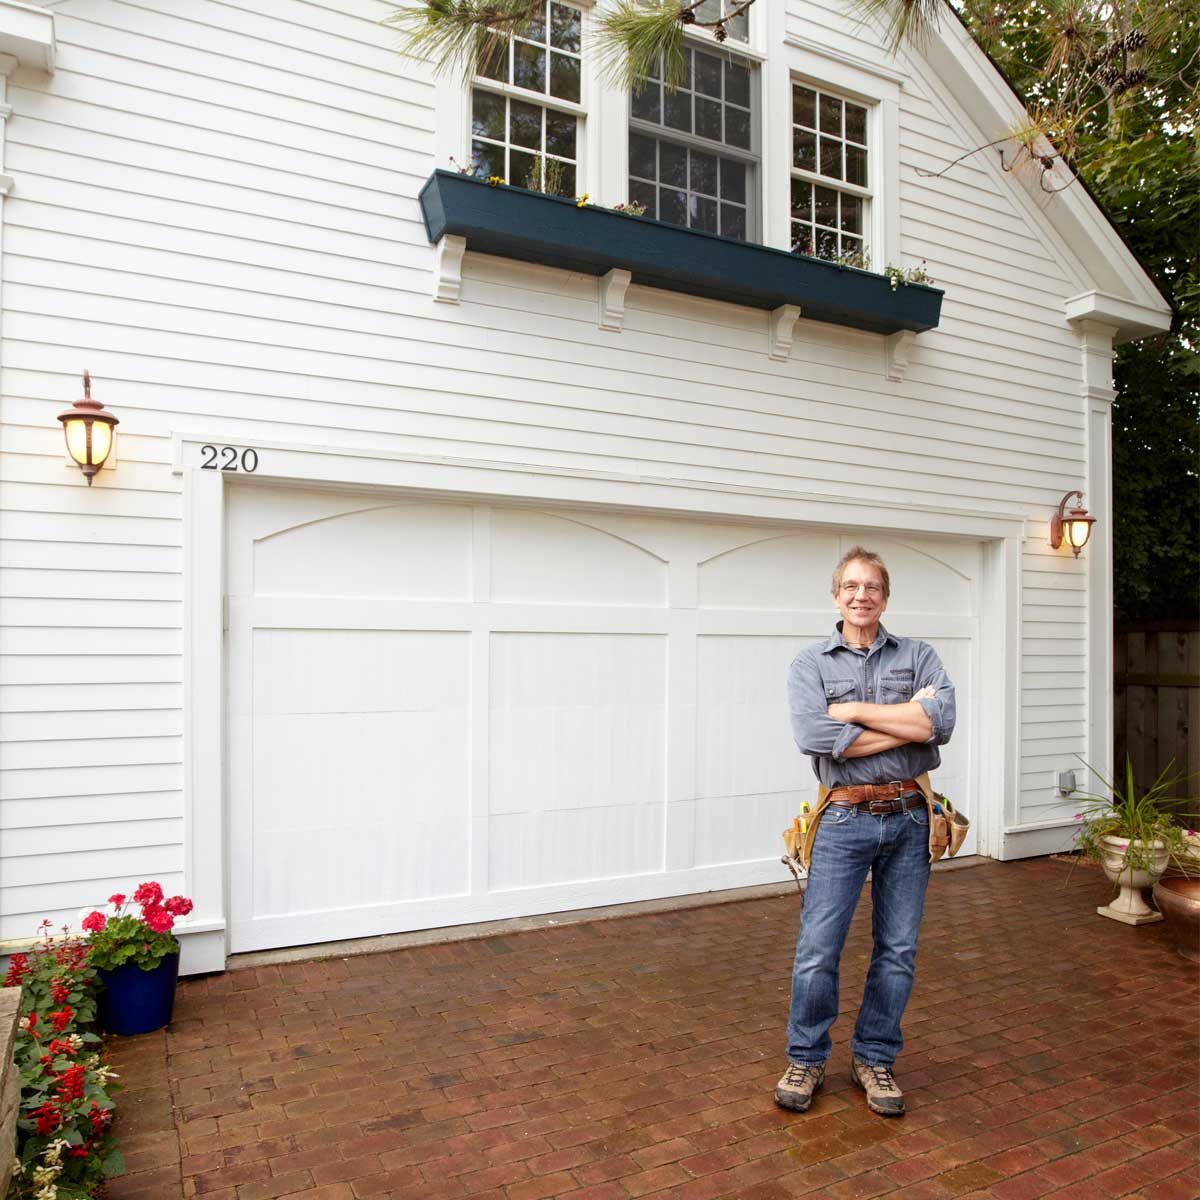 8 Garage Paint Ideas to Consider Inside and Out | Family Handyman